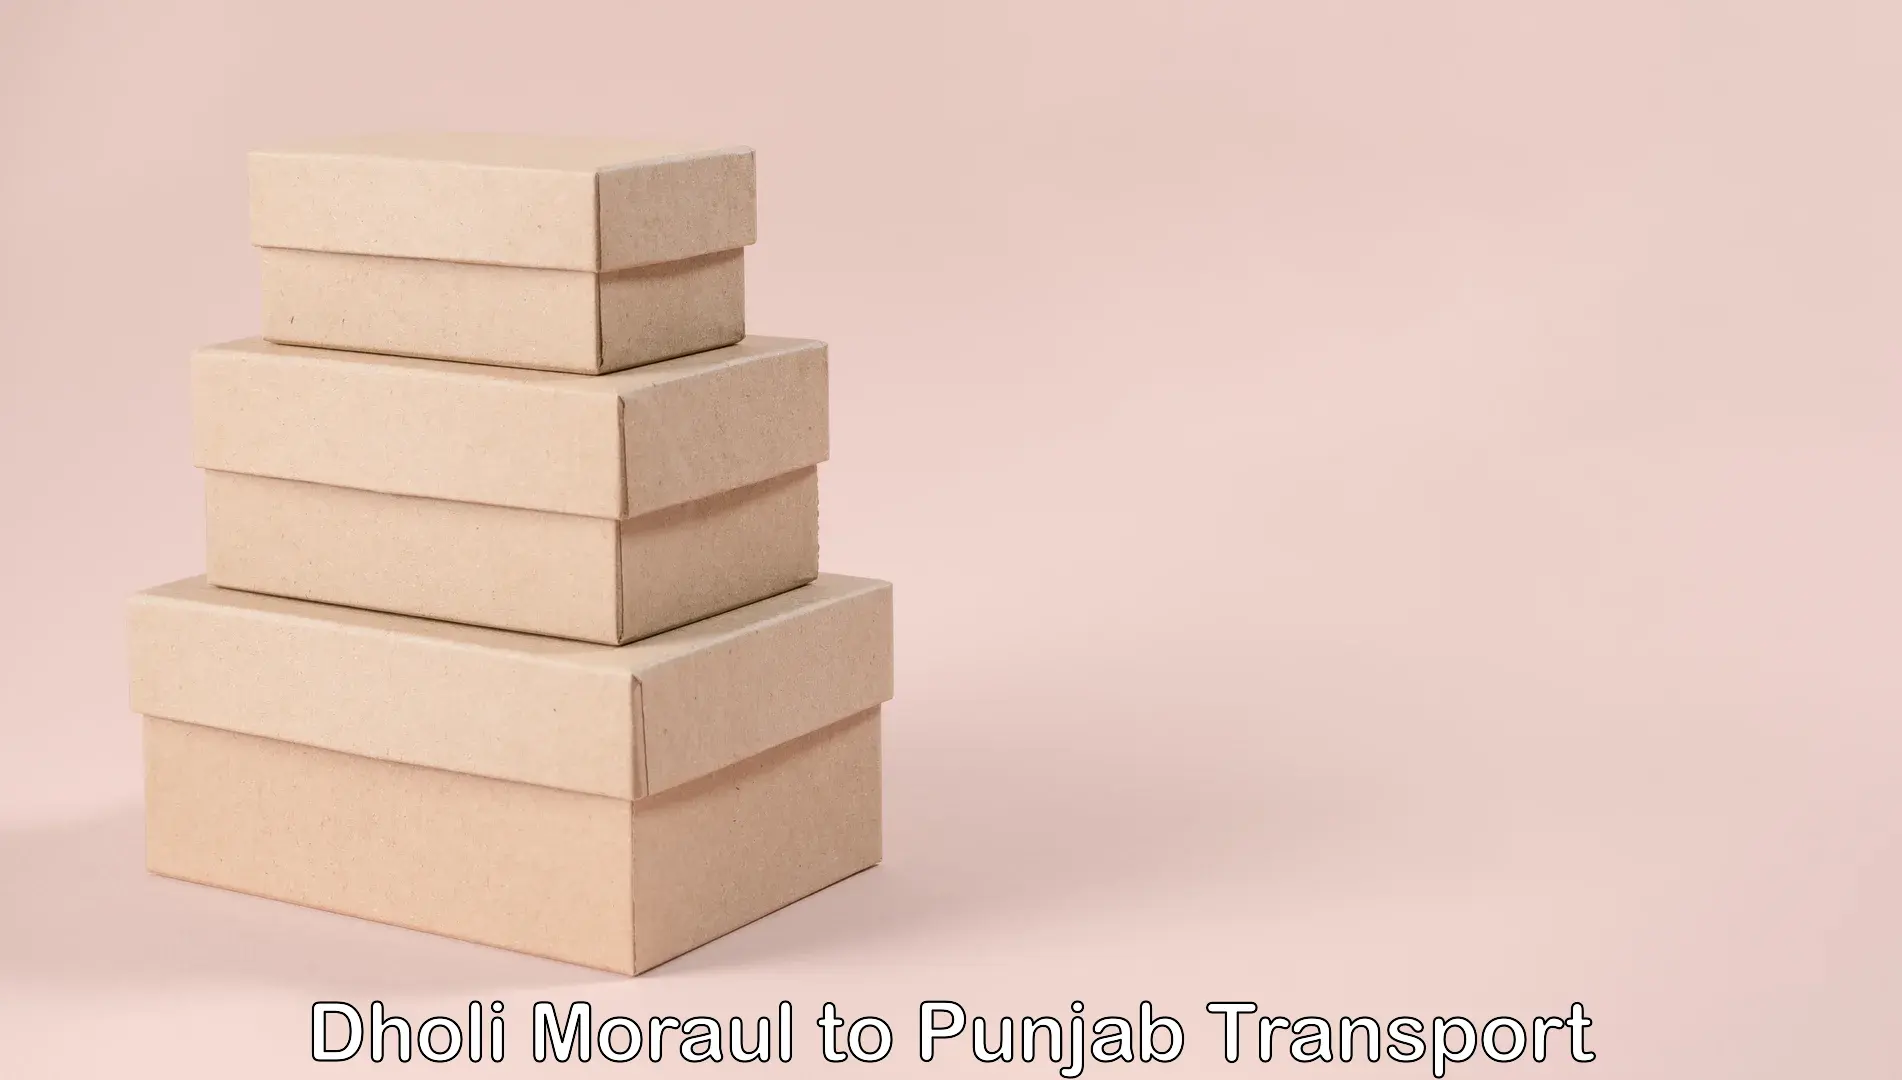 Package delivery services Dholi Moraul to Punjab